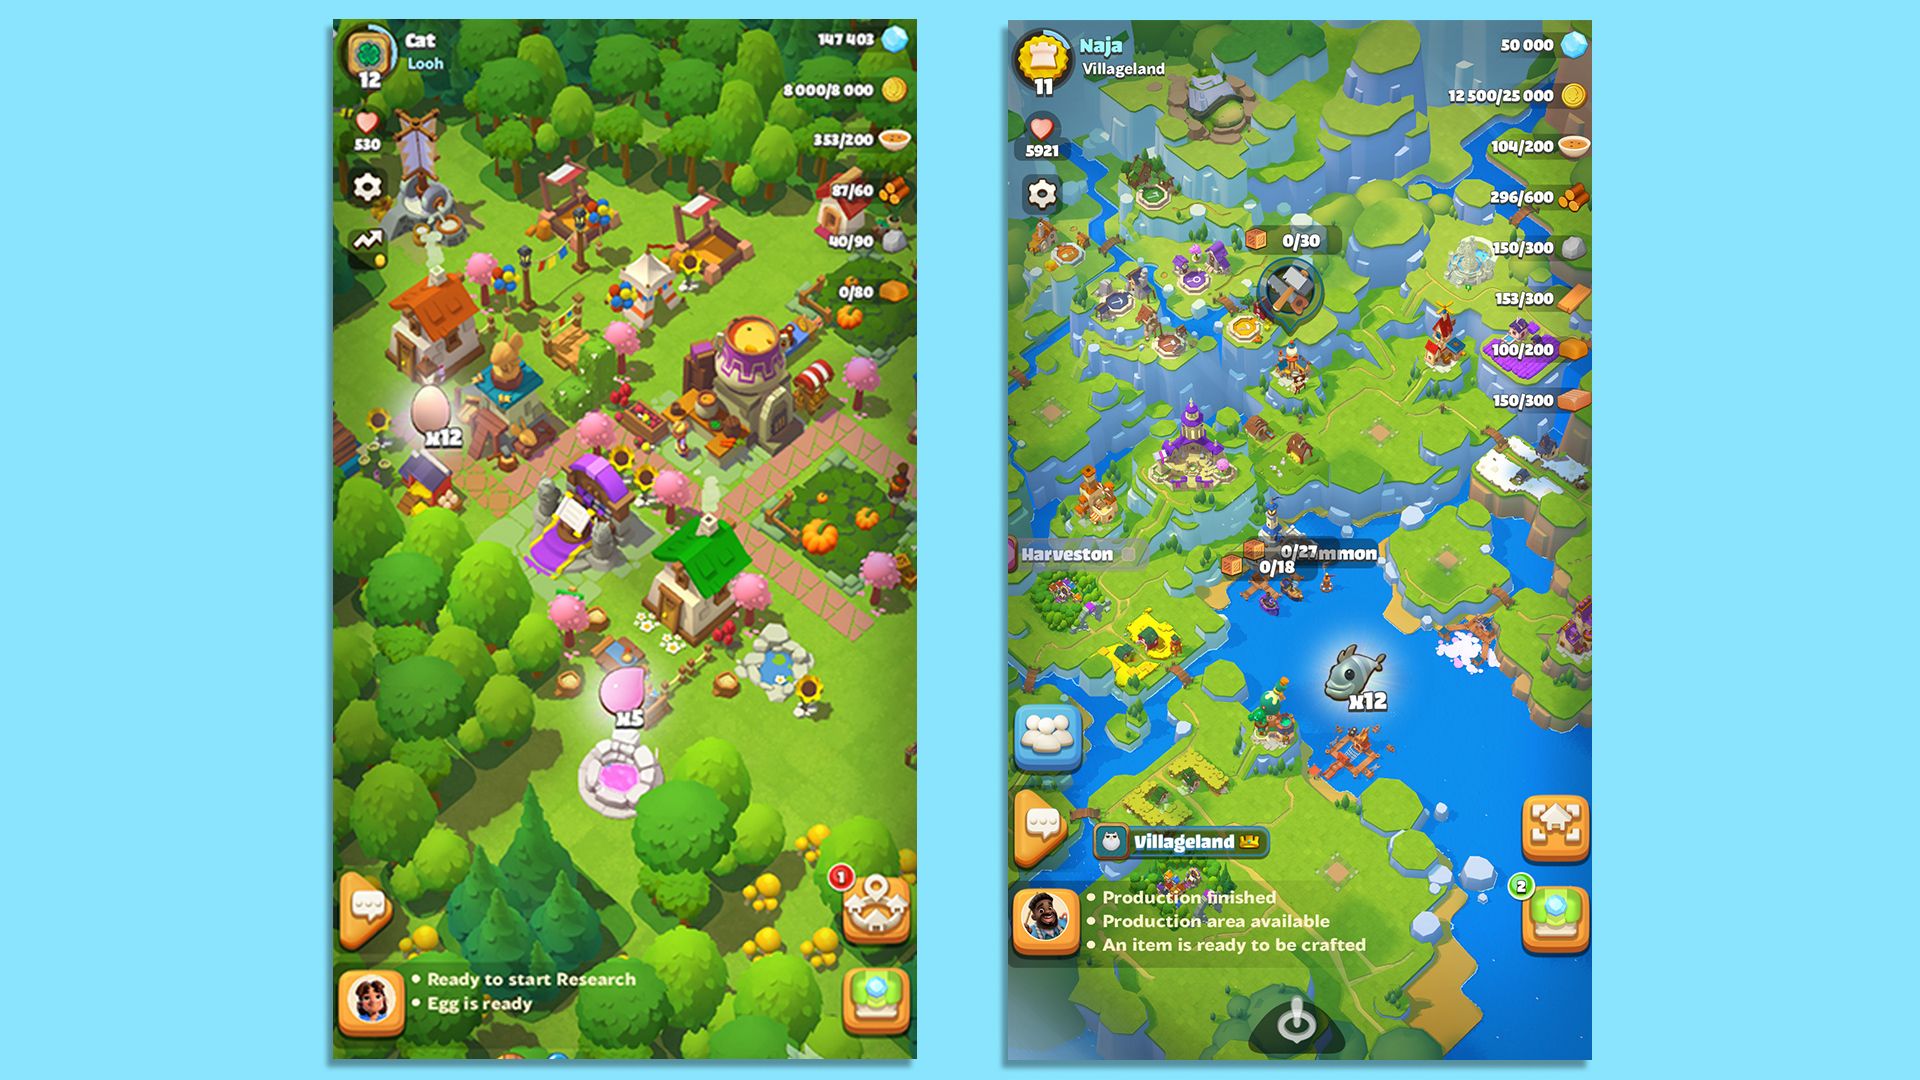 Two images of a mobile video game that involves building villages